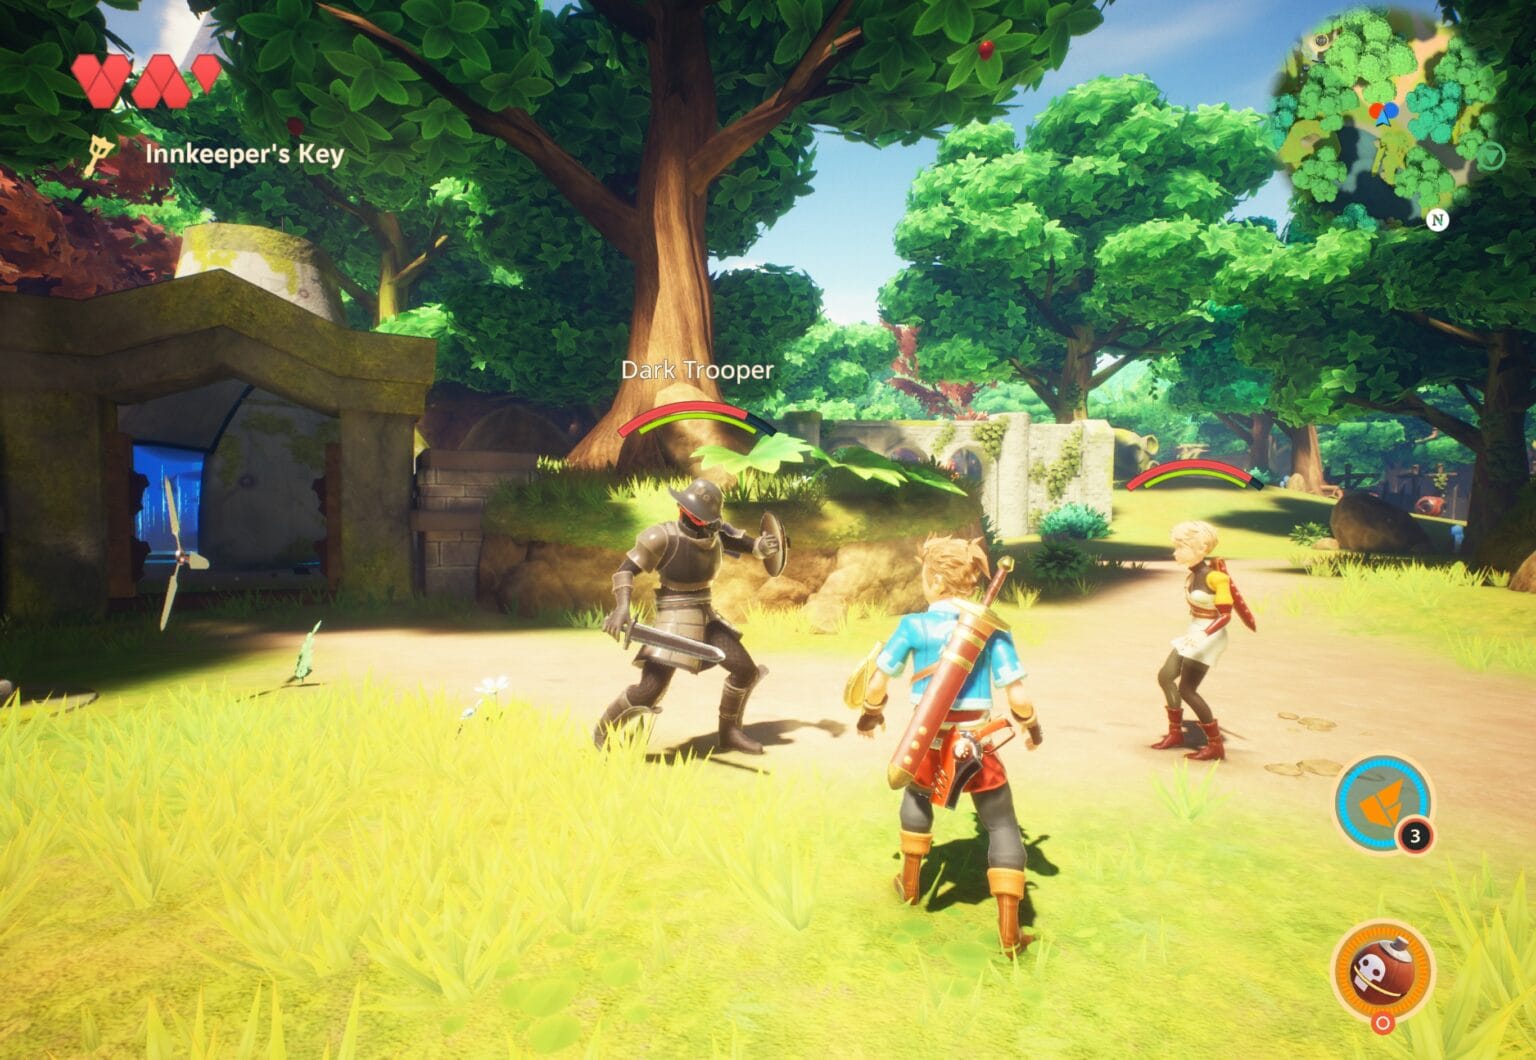 Oceanhorn 2: Knights of the Lost Realm involves battling robots with swords.